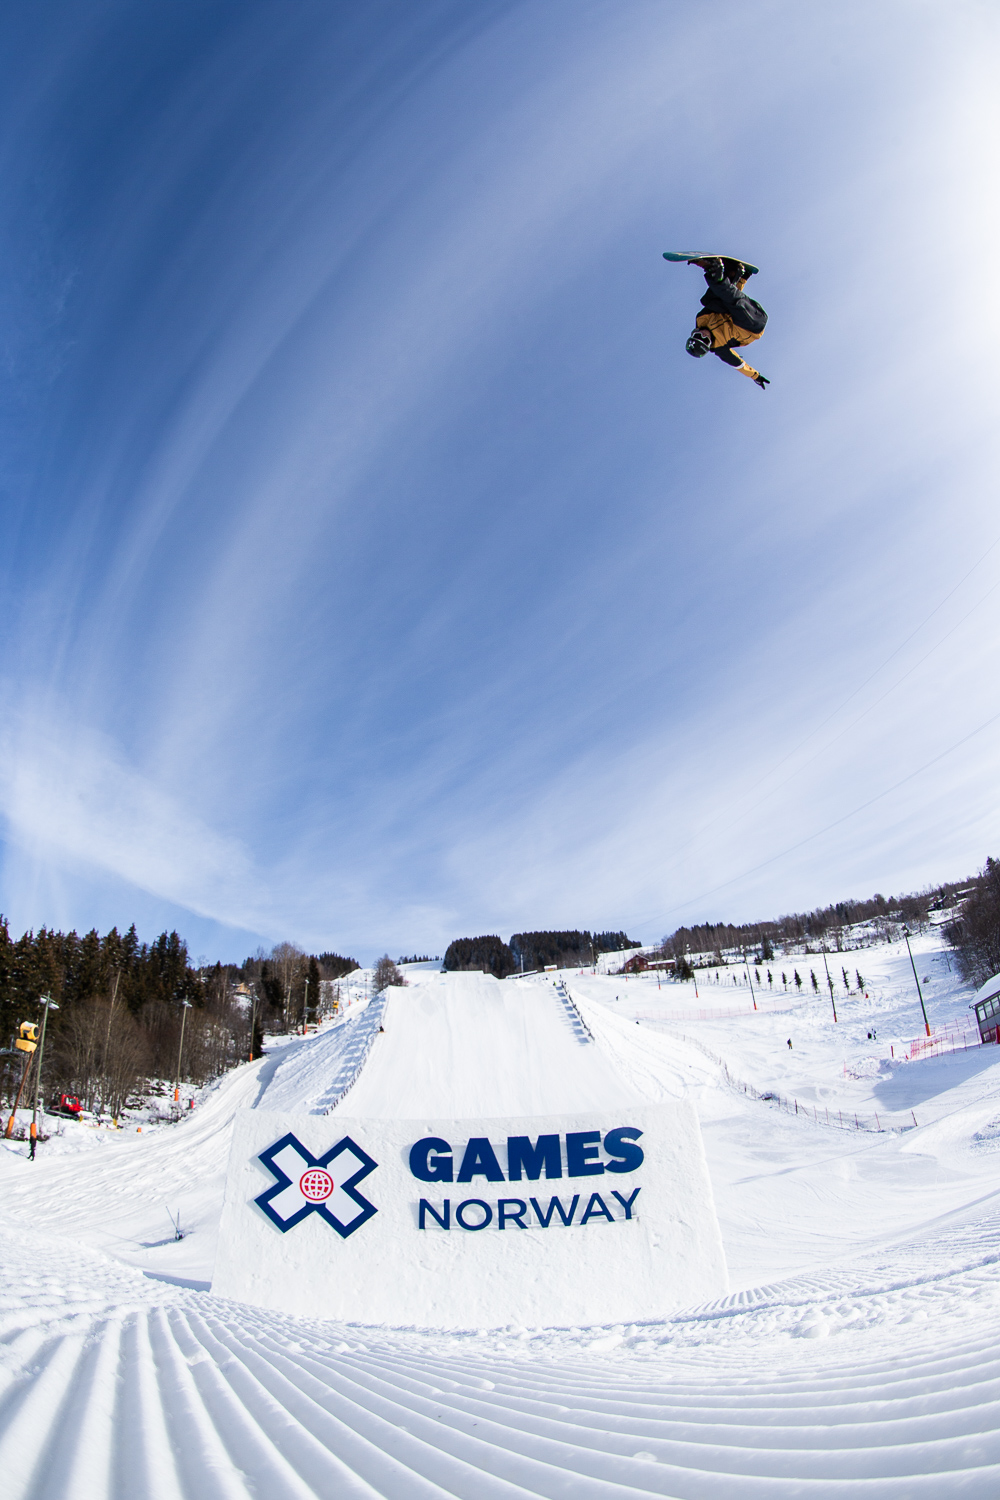 Monster Energy's Ståle Sandbech Takes Bronze in Men's Snowboard Slopestyle at X Games Norway 2020